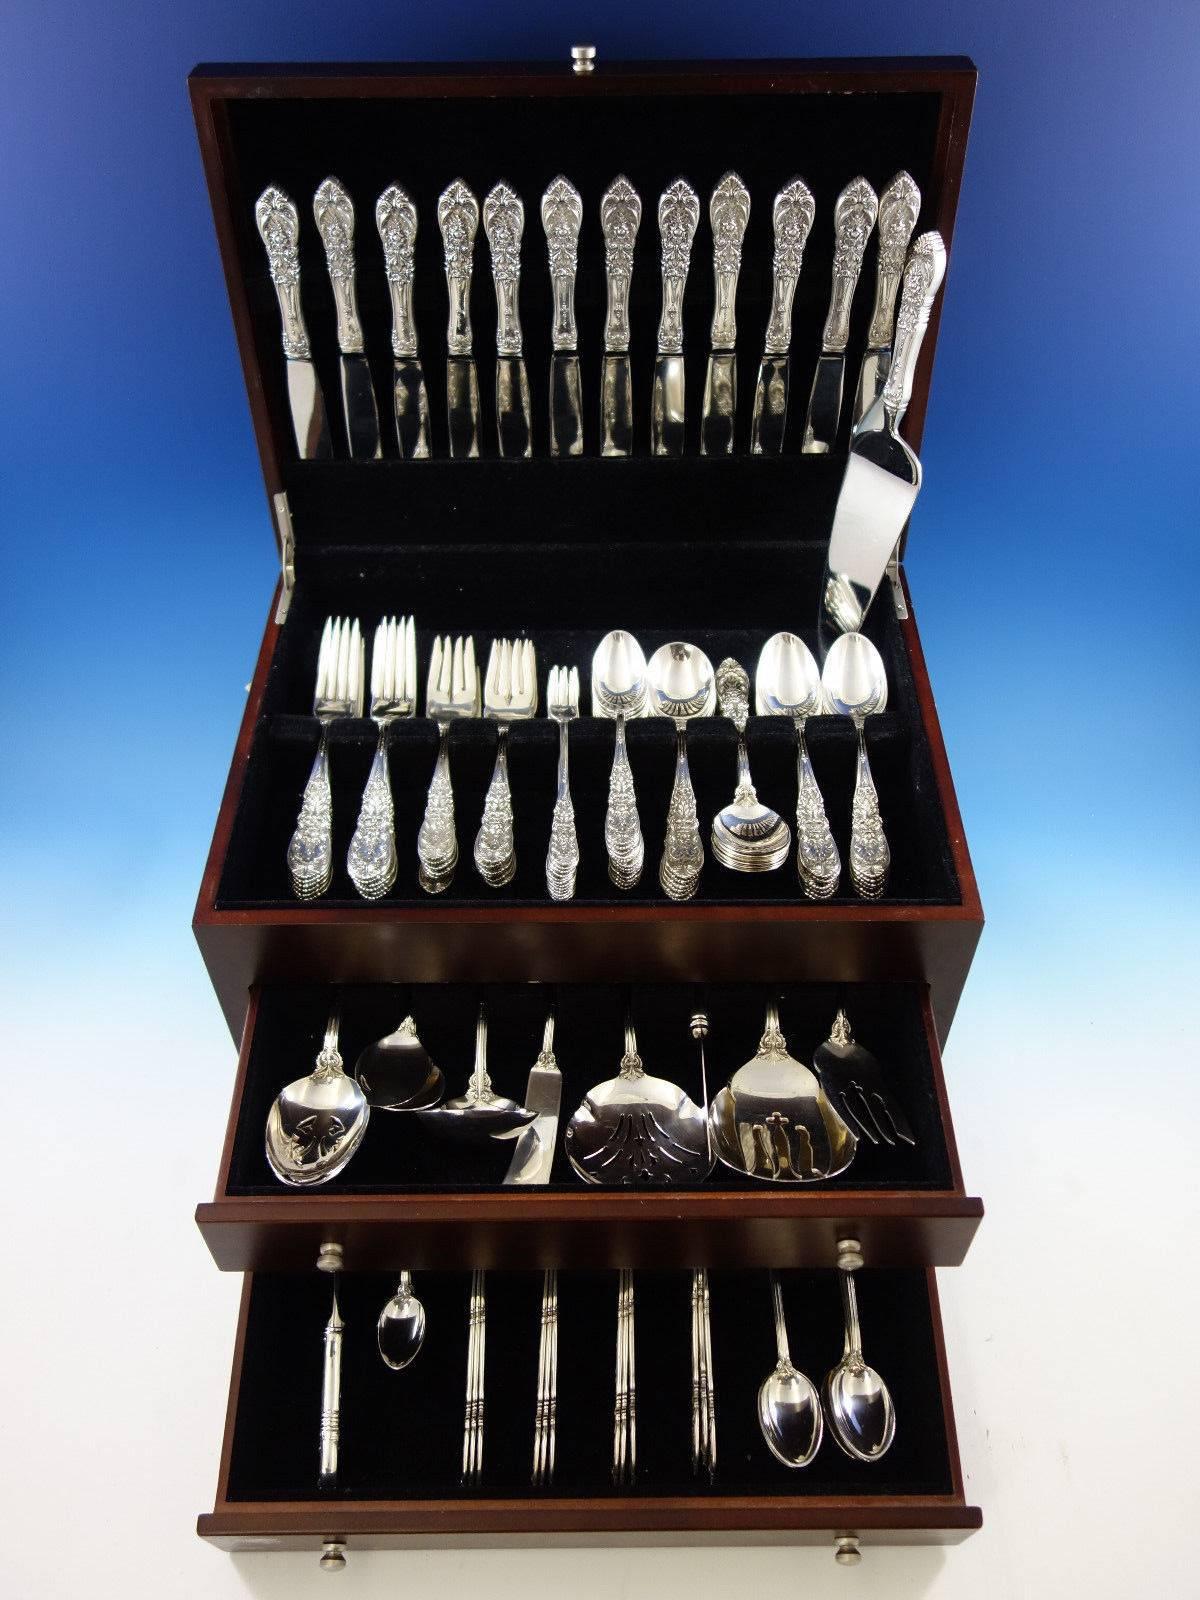 Monumental Richelieu by International sterling silver flatware set - 135 pieces. This set includes: 

12 knives, 8 3/4